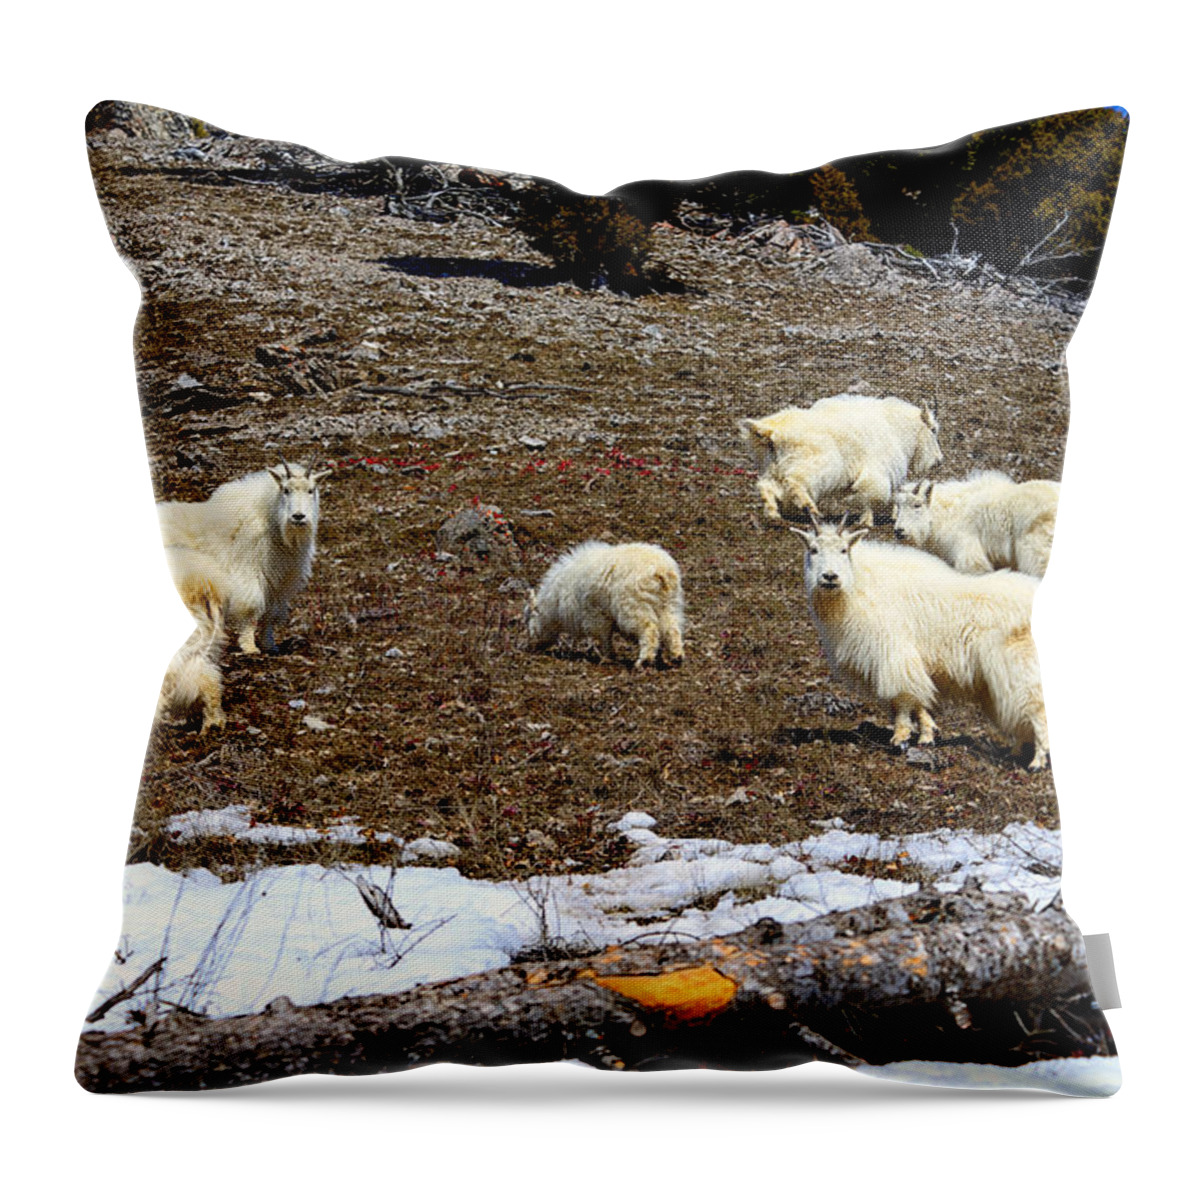 Mountain Goat Throw Pillow featuring the photograph Alpine Mountain Goats by Greg Norrell